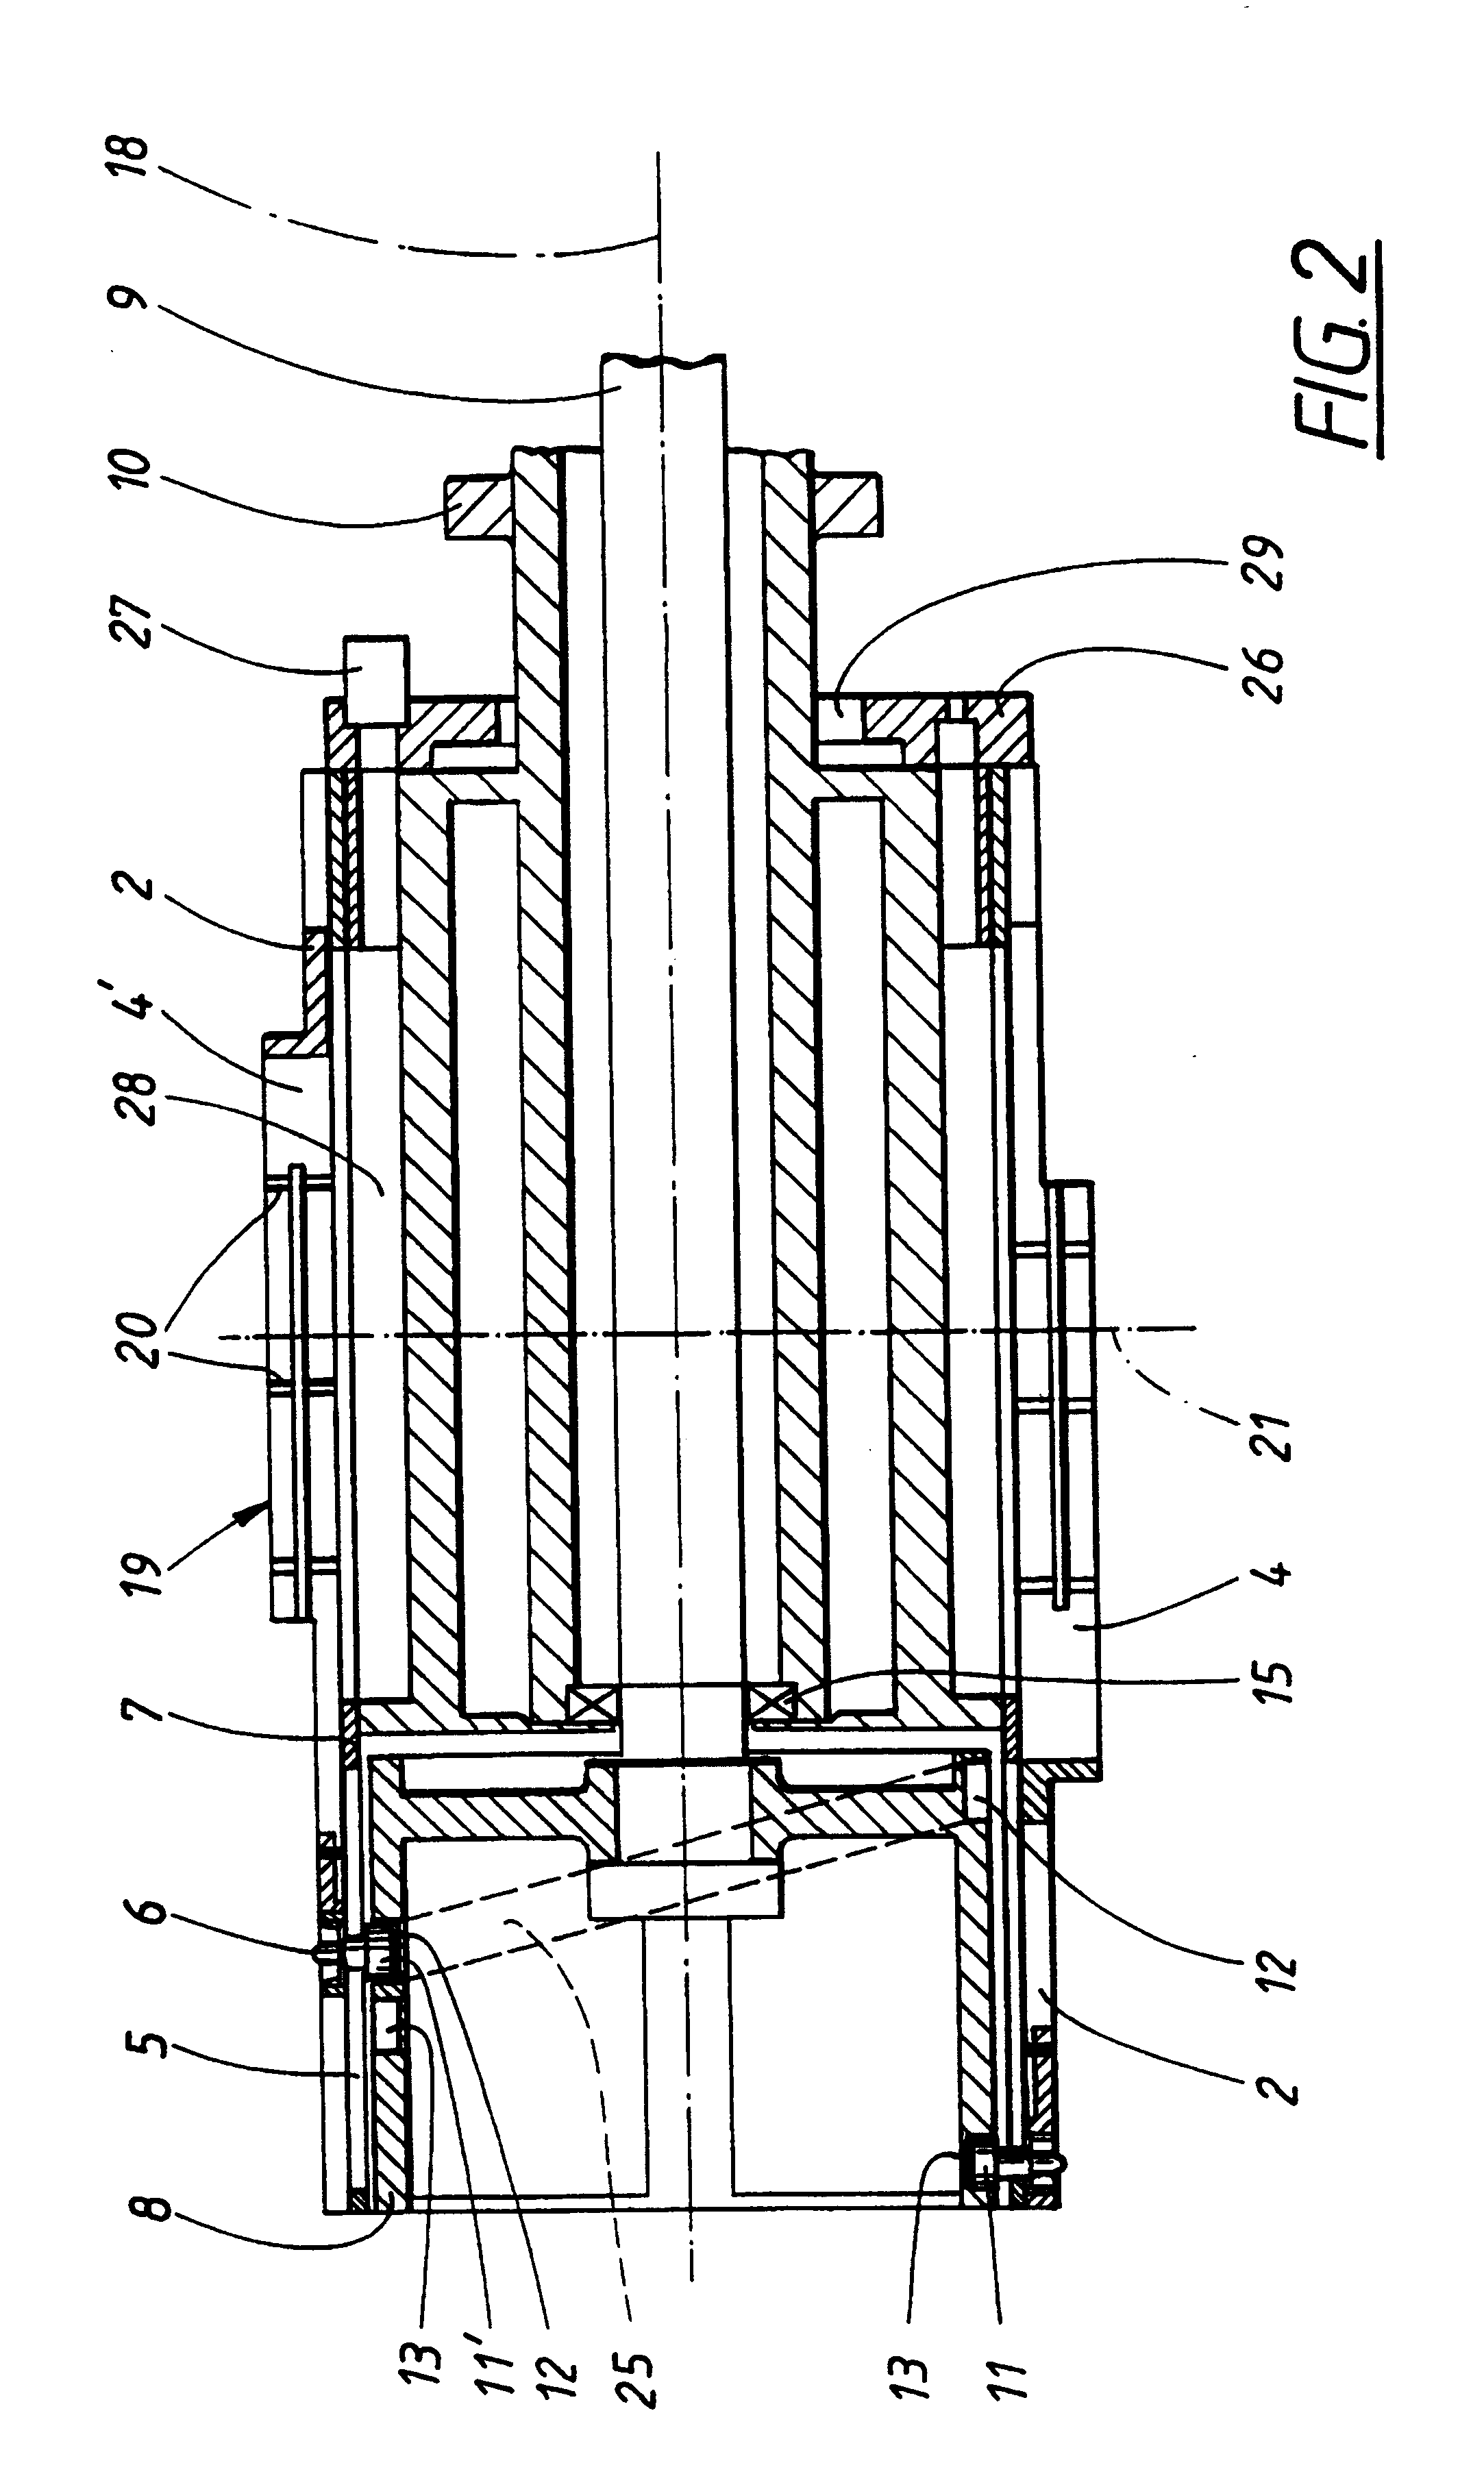 Application drum for use in the production of absorbent articles